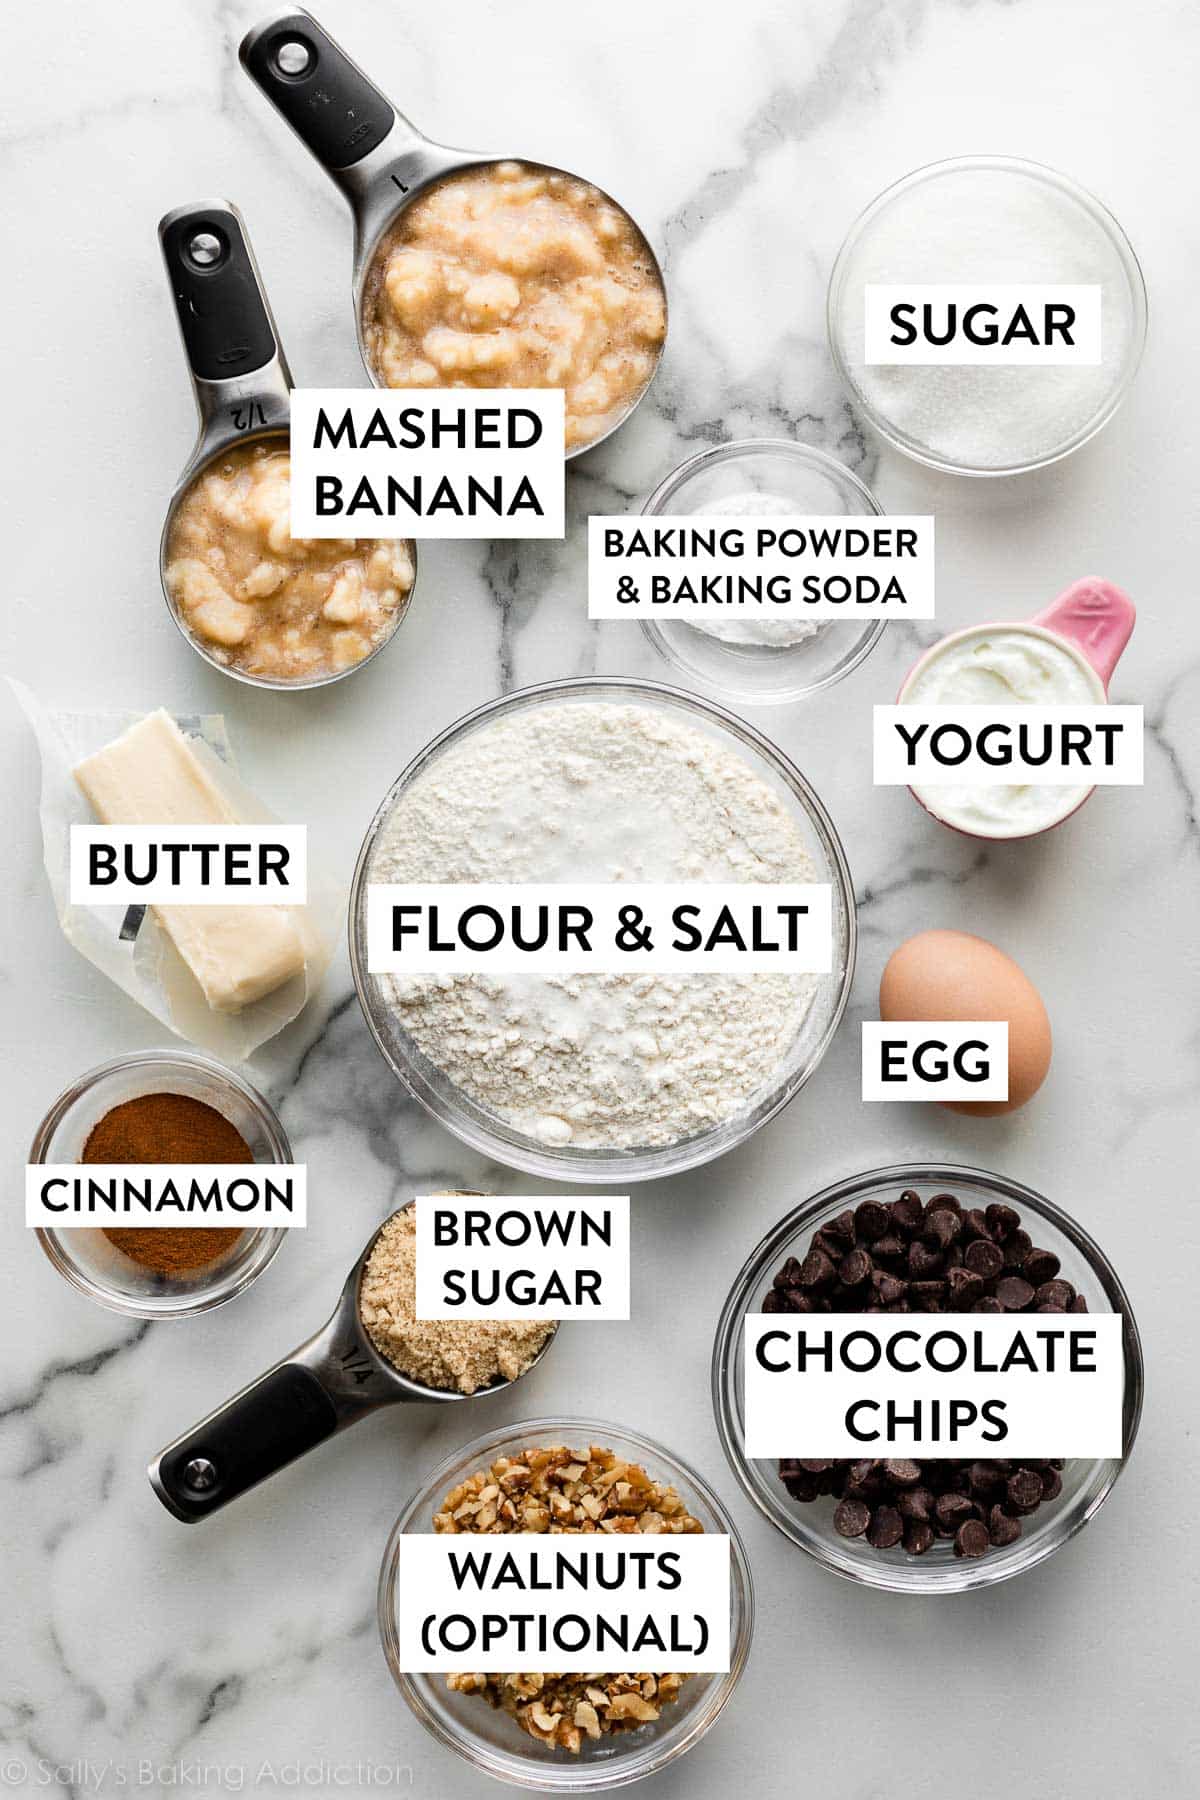 flour, egg, yogurt, sugar, brown sugar, chocolate chips, butter, and other ingredients on marble counter.